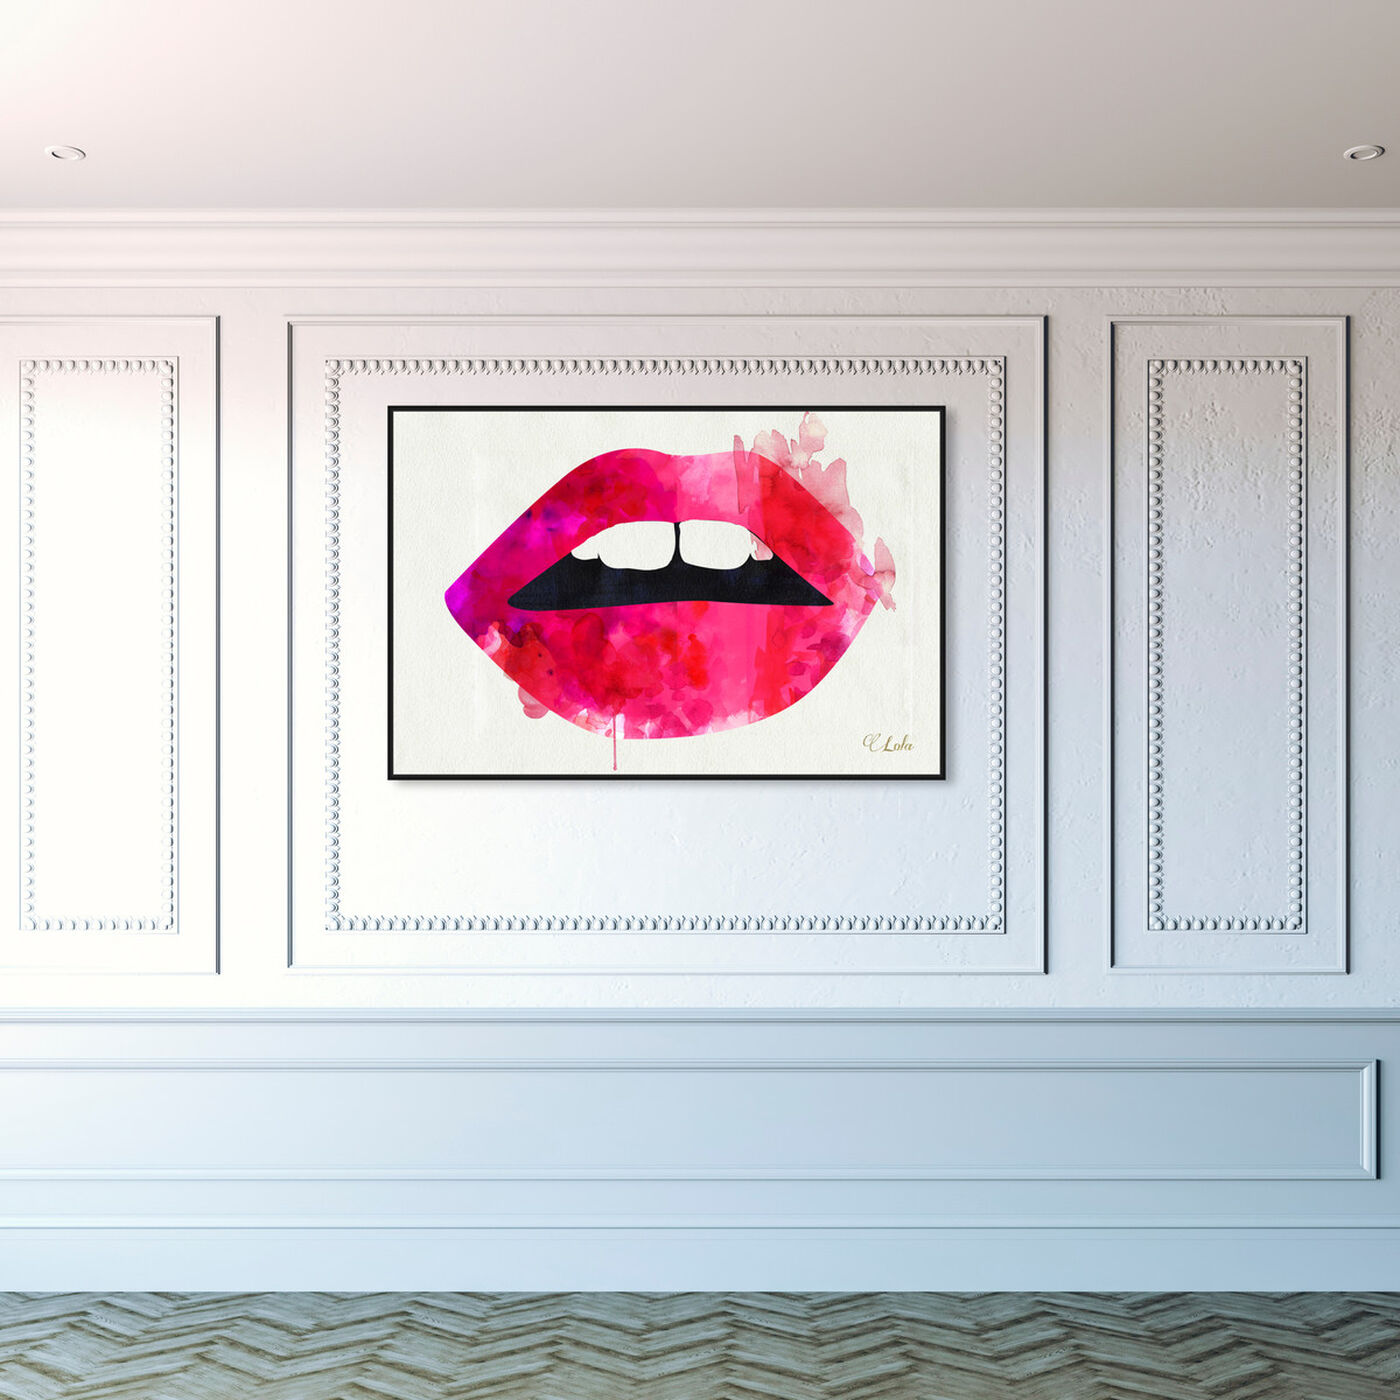 Hanging view of Lola's Lips featuring fashion and glam and lips art.